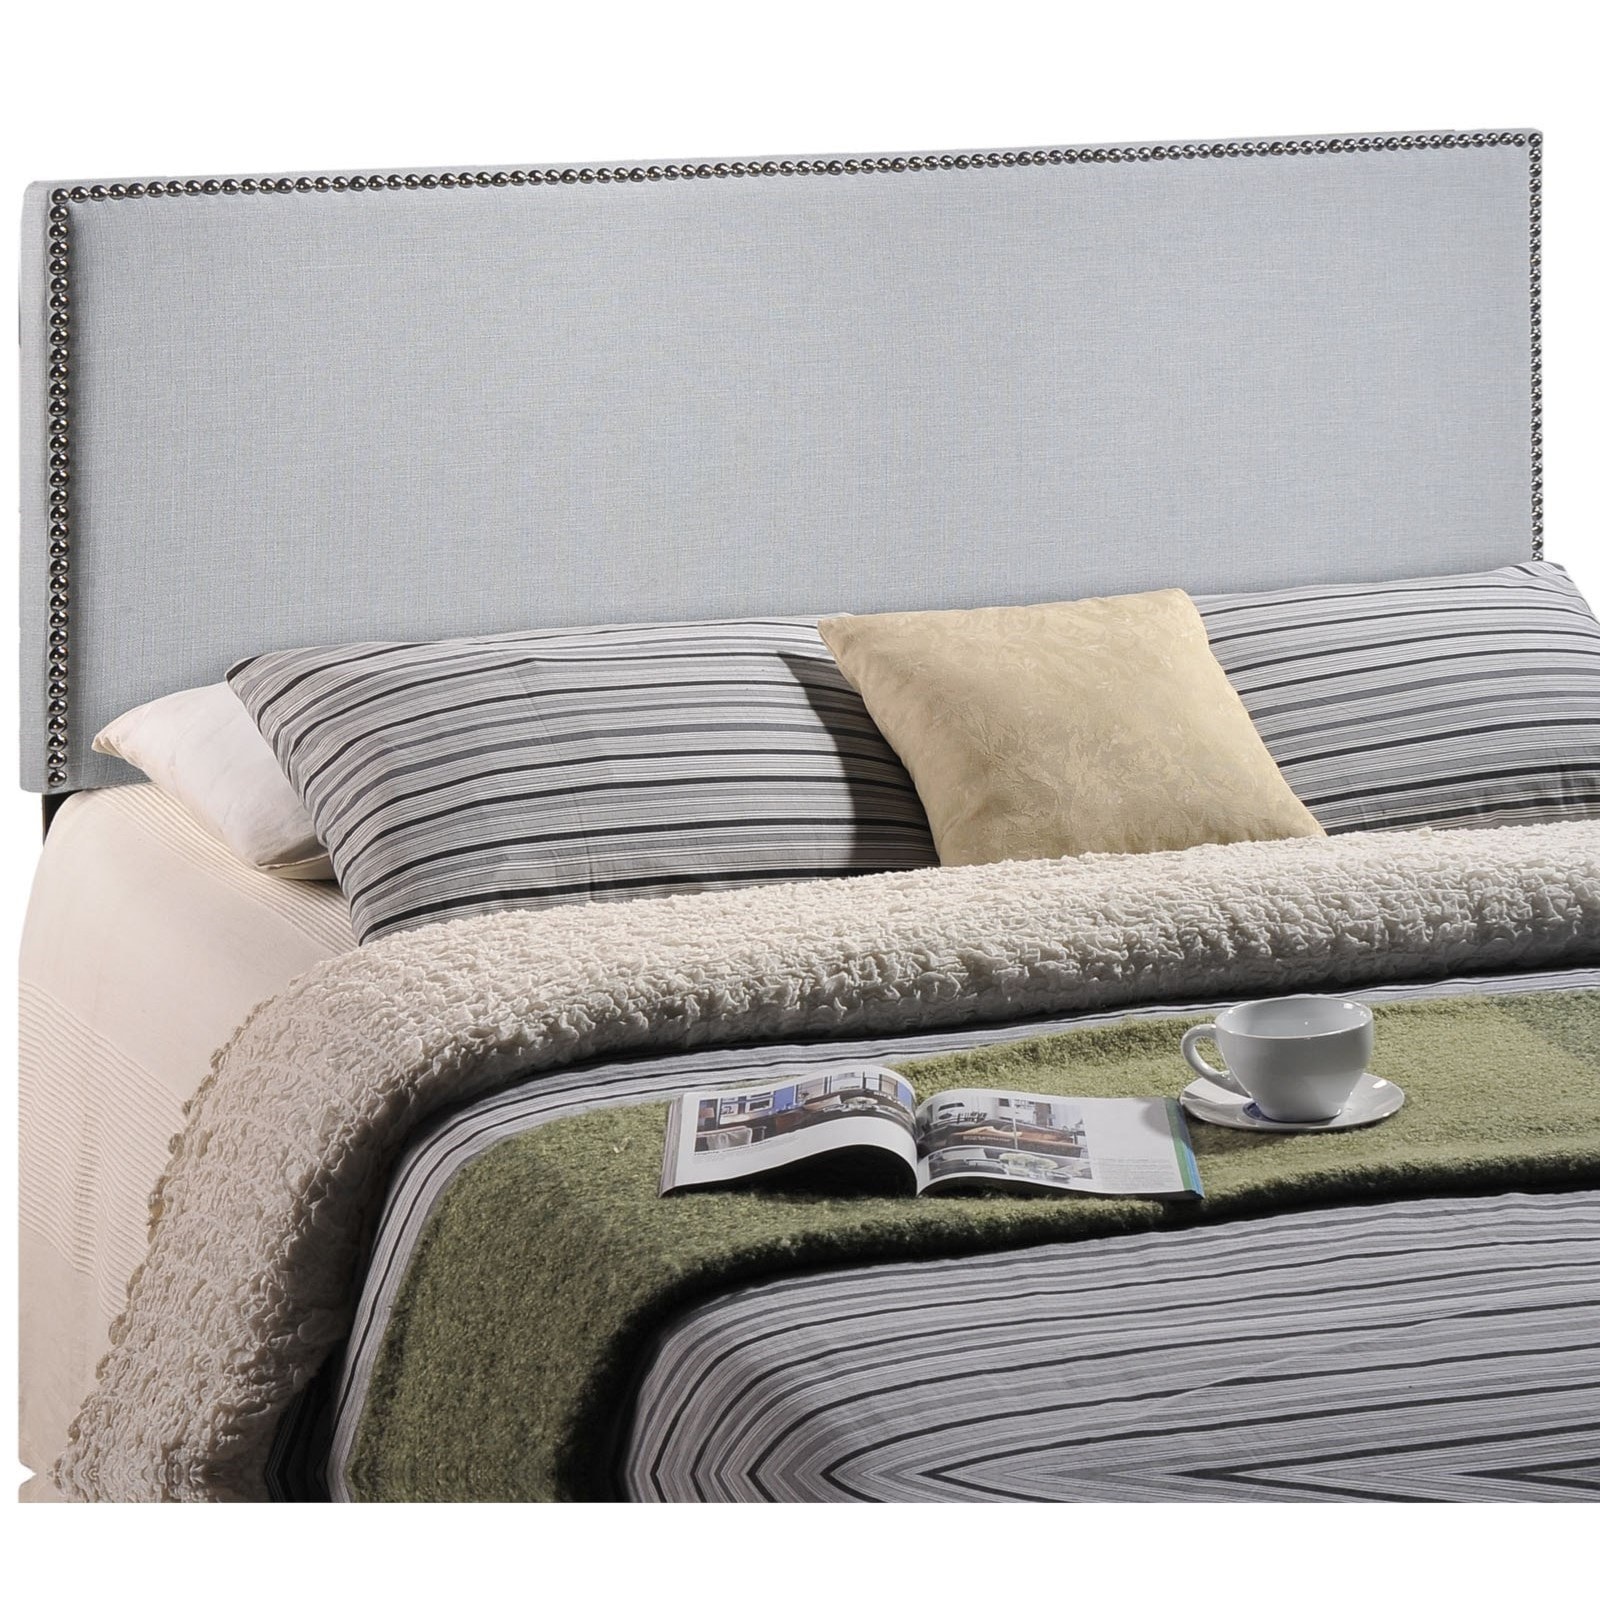 Modway Region Linen Fabric Upholstered Queen Headboard in Gray with Nailhead Trim